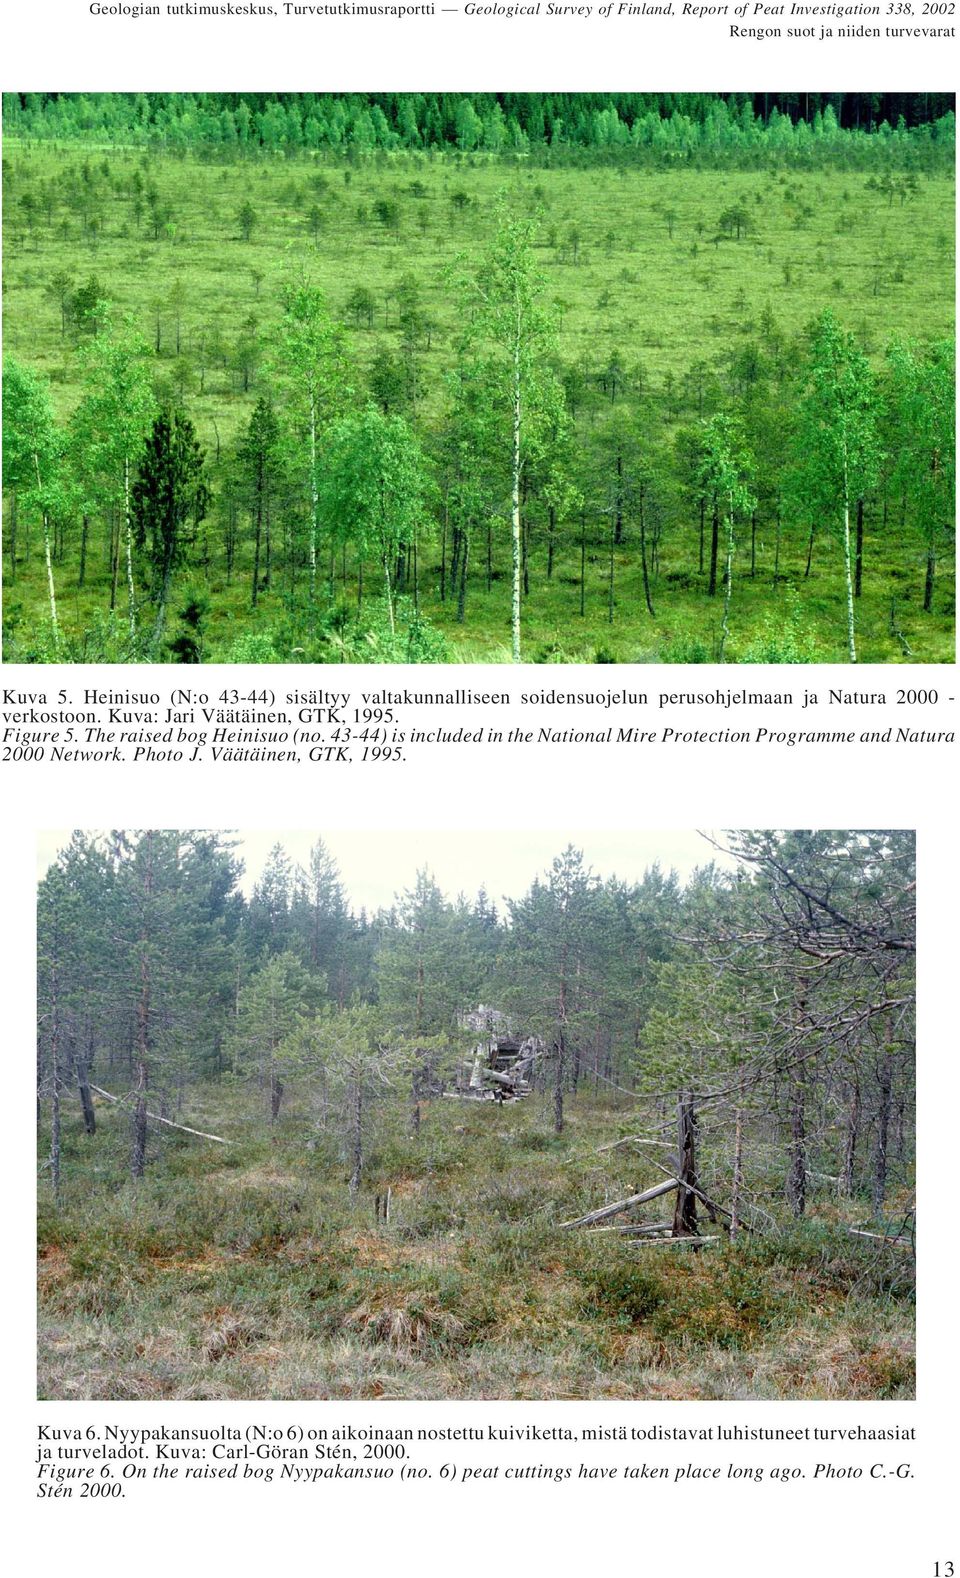 43-44) is included in the National Mire Protection Programme and Natura 2000 Network. Photo J. Väätäinen, GTK, 1995. Kuva 6.